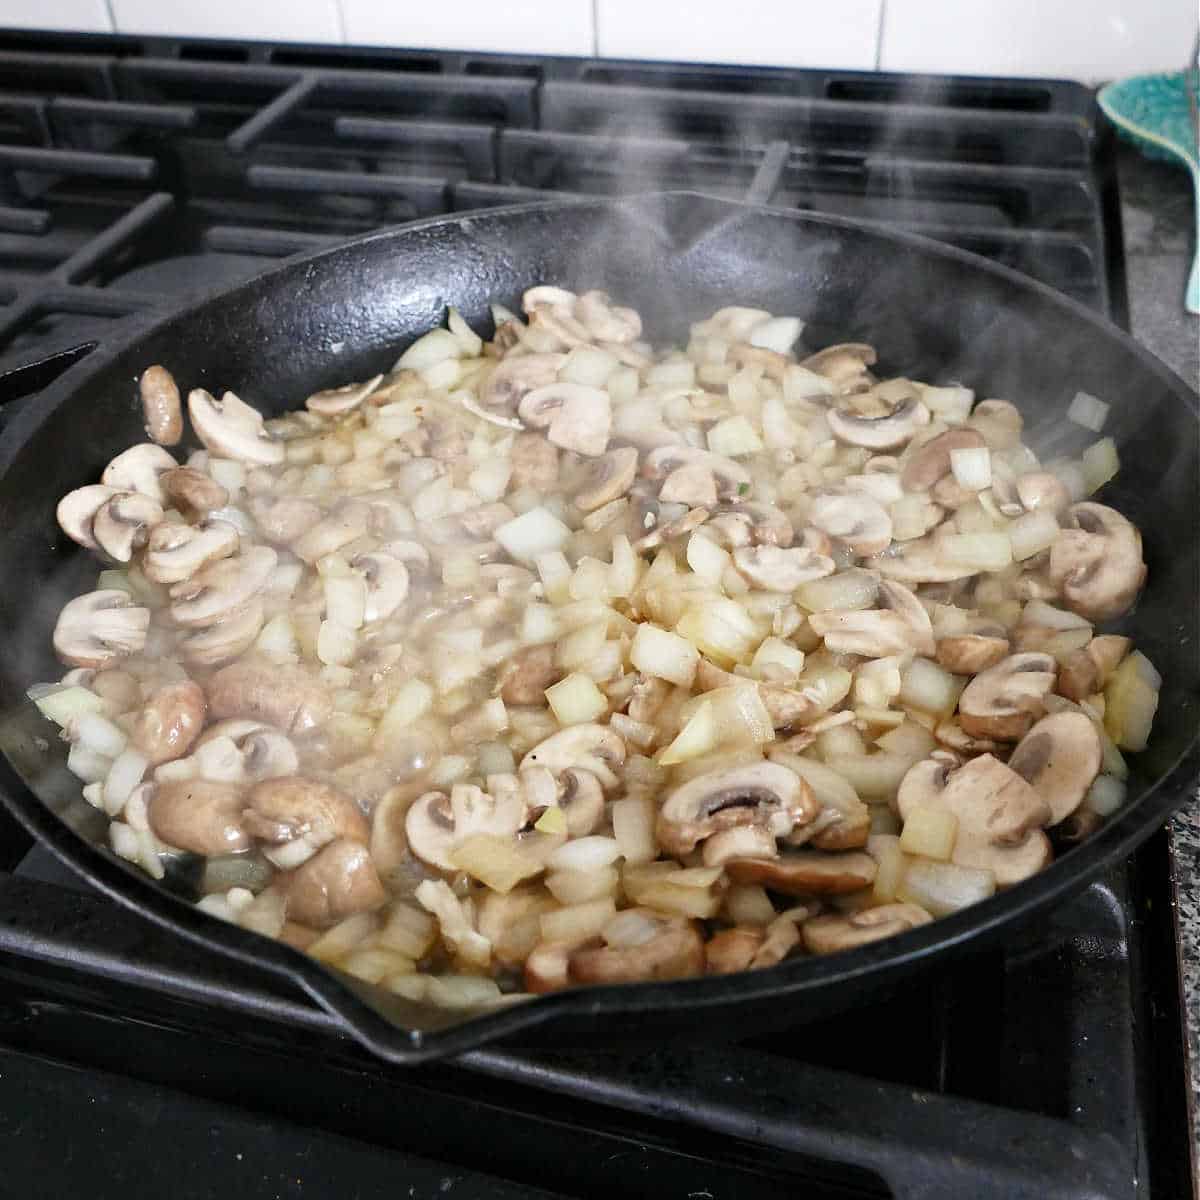 mushrooms and onions cooking in a cast iron skillet on a stove